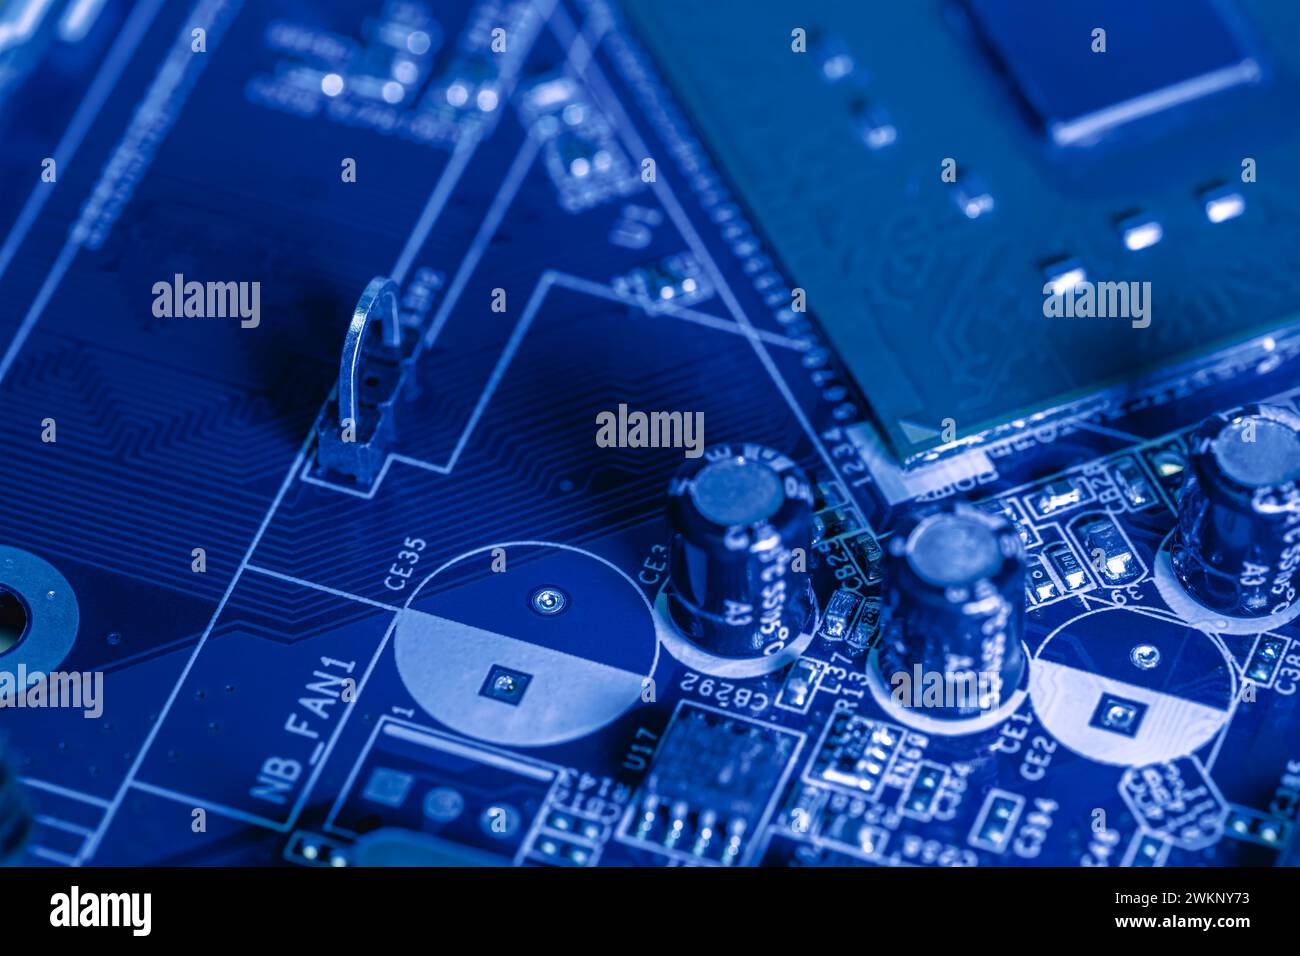 electronic components and microchips on computer circuit board. extreme closeup. Stock Photo